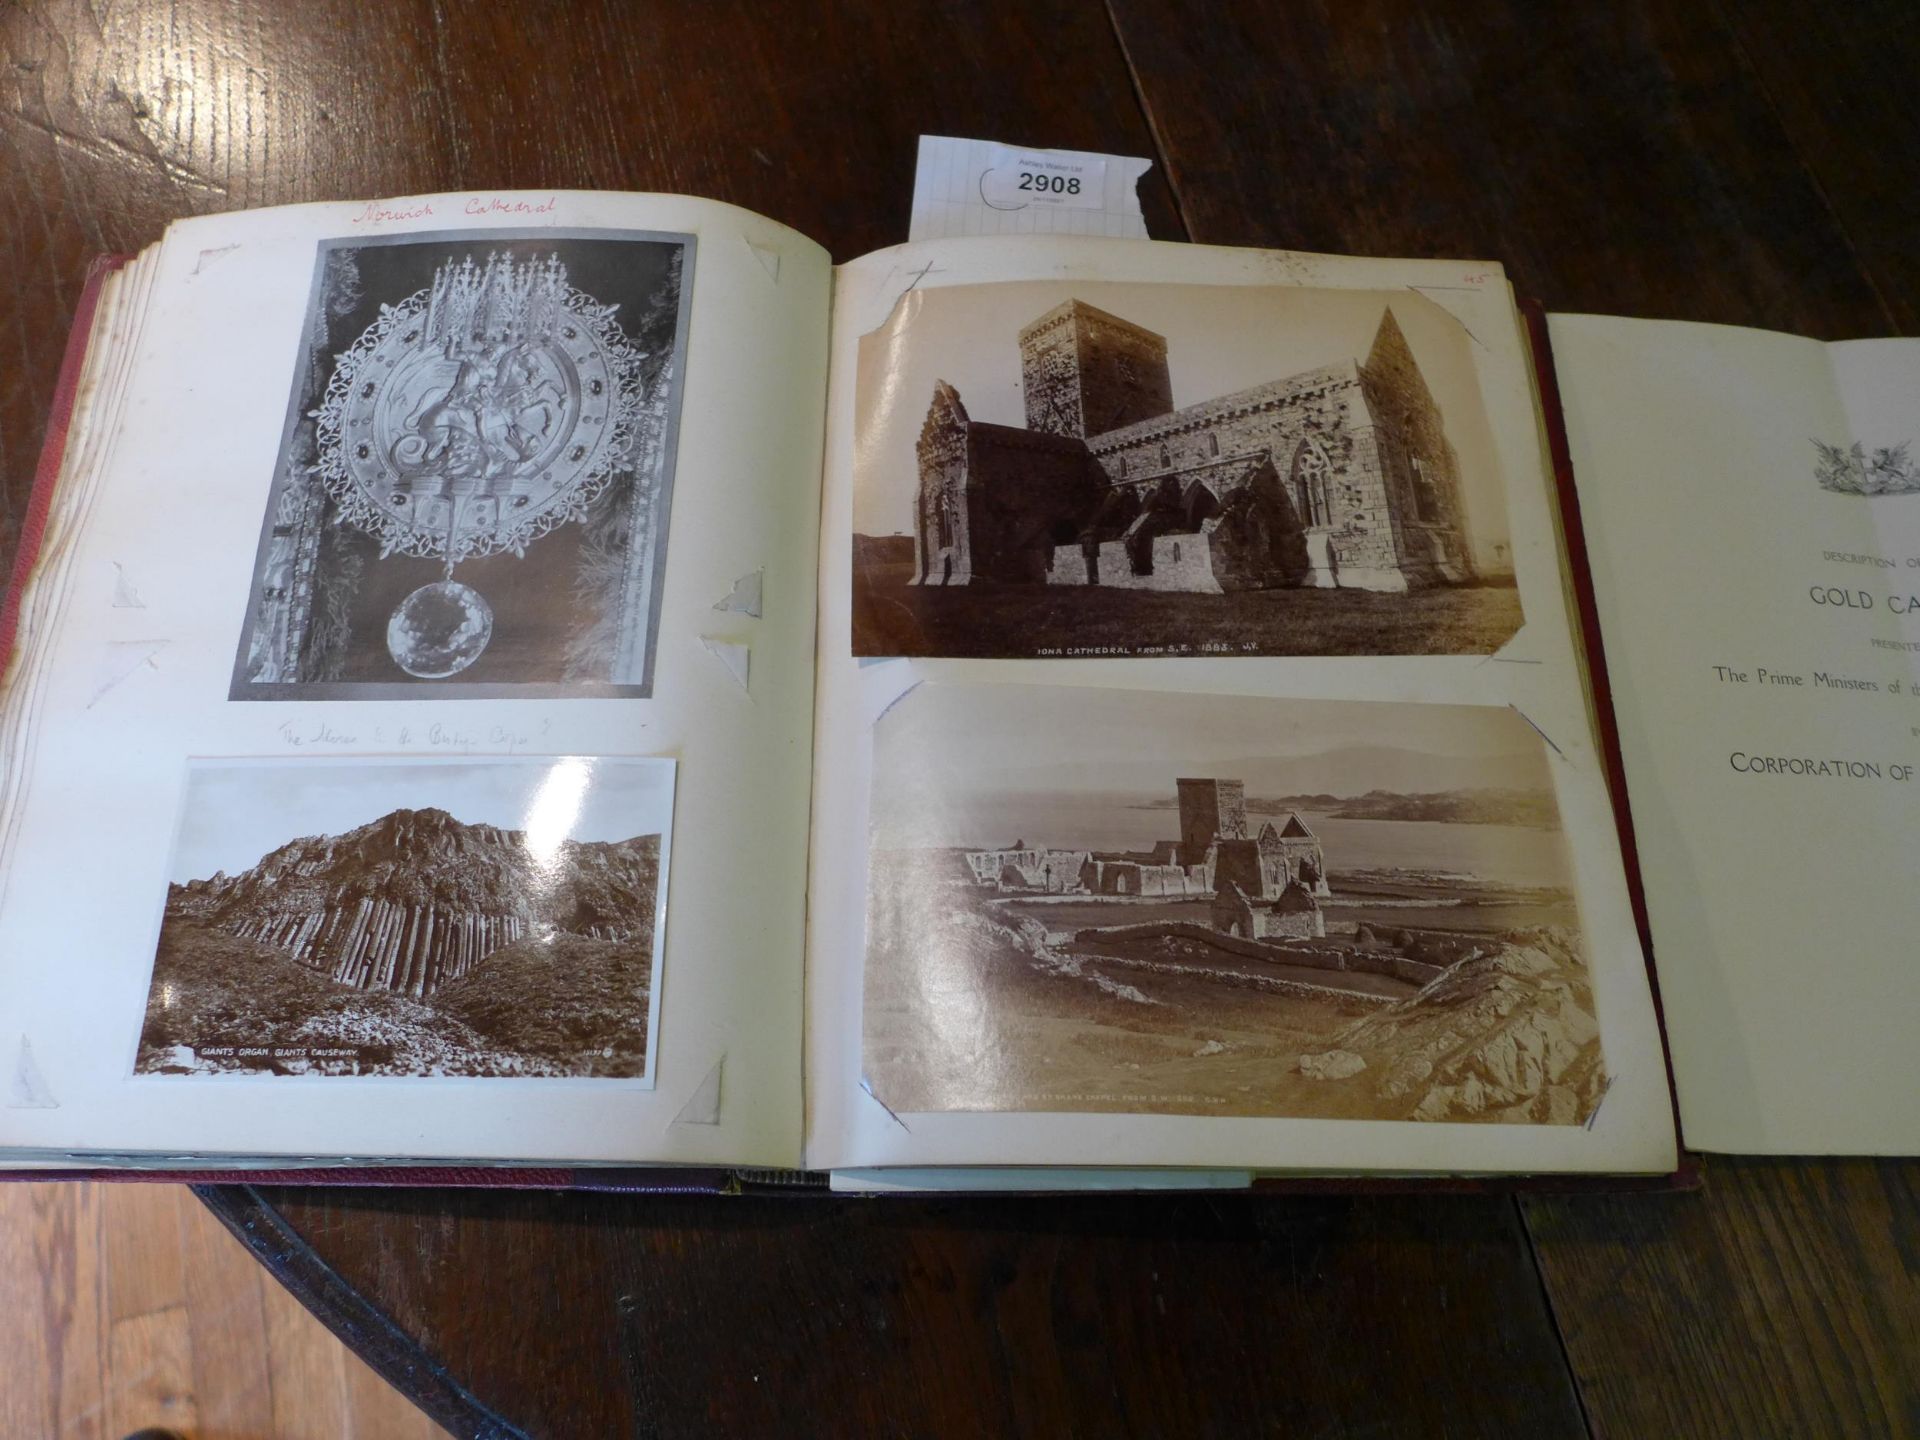 AN OLD PHOTO ALBUM WITH PHOTOS OF CATHEDRALS, HOUSES AND CASTLES ETC - Image 2 of 4